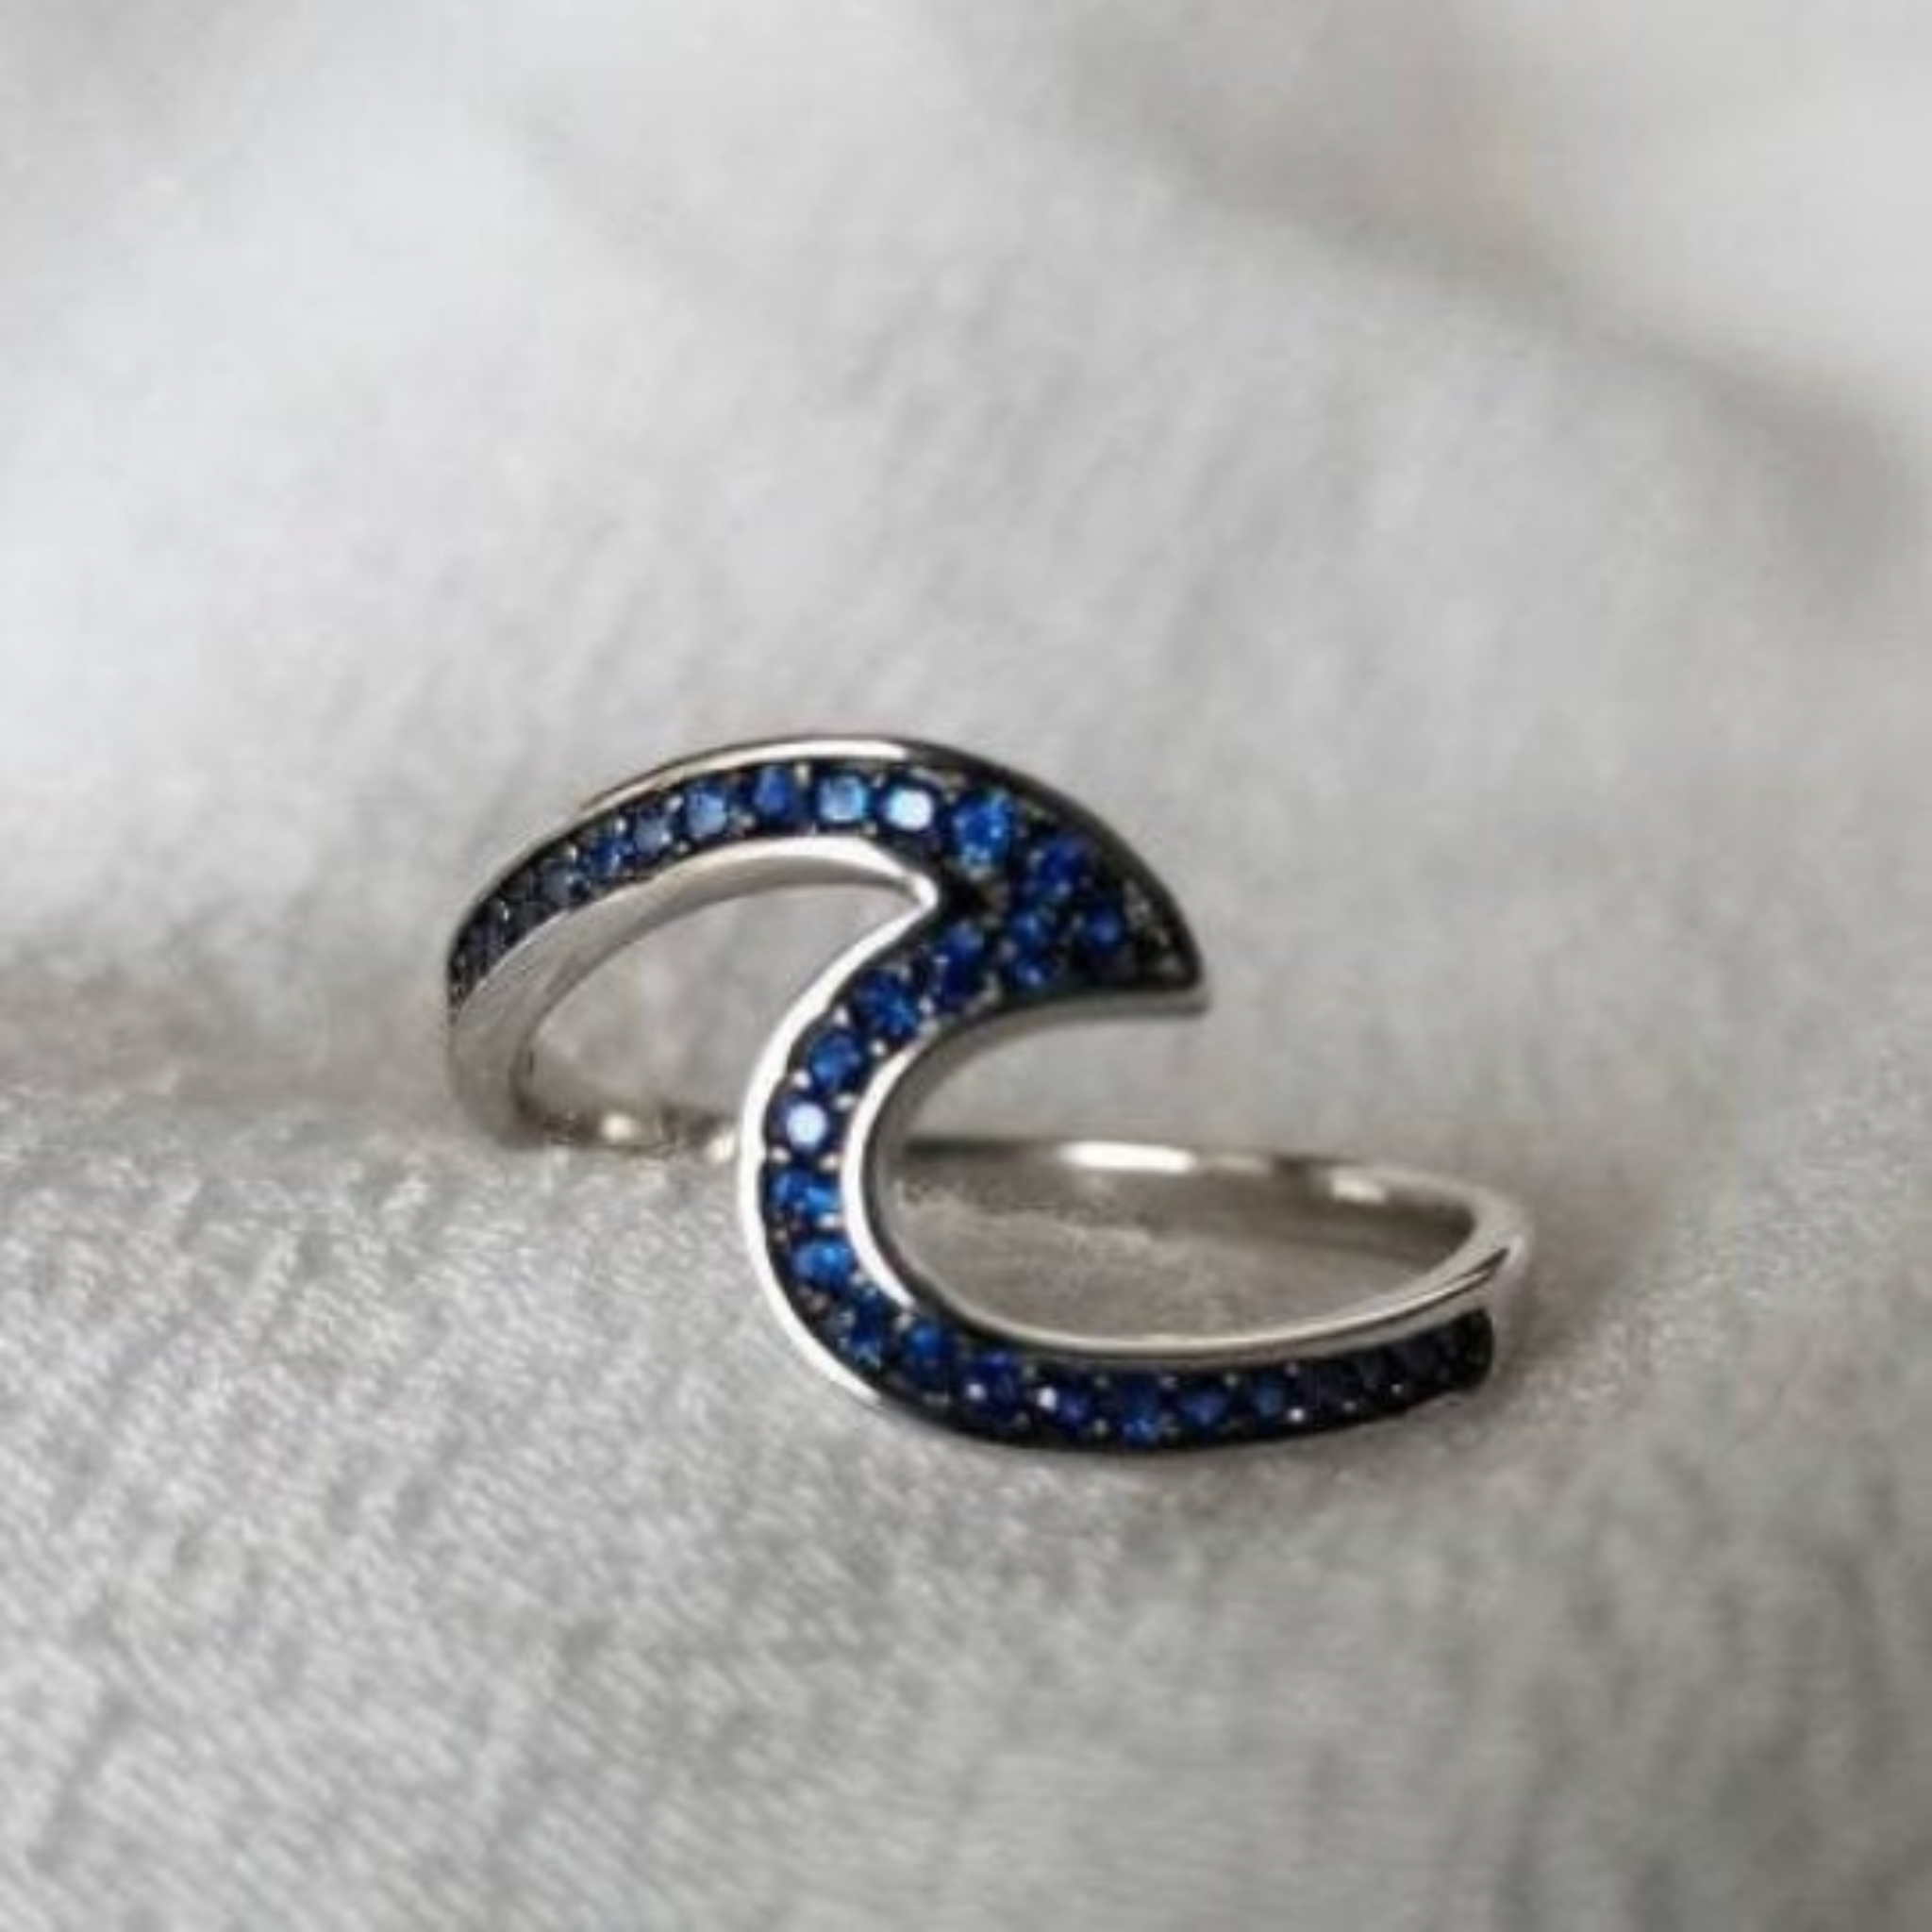 Blue Sapphire Large Wave Ring - Sterling Silver